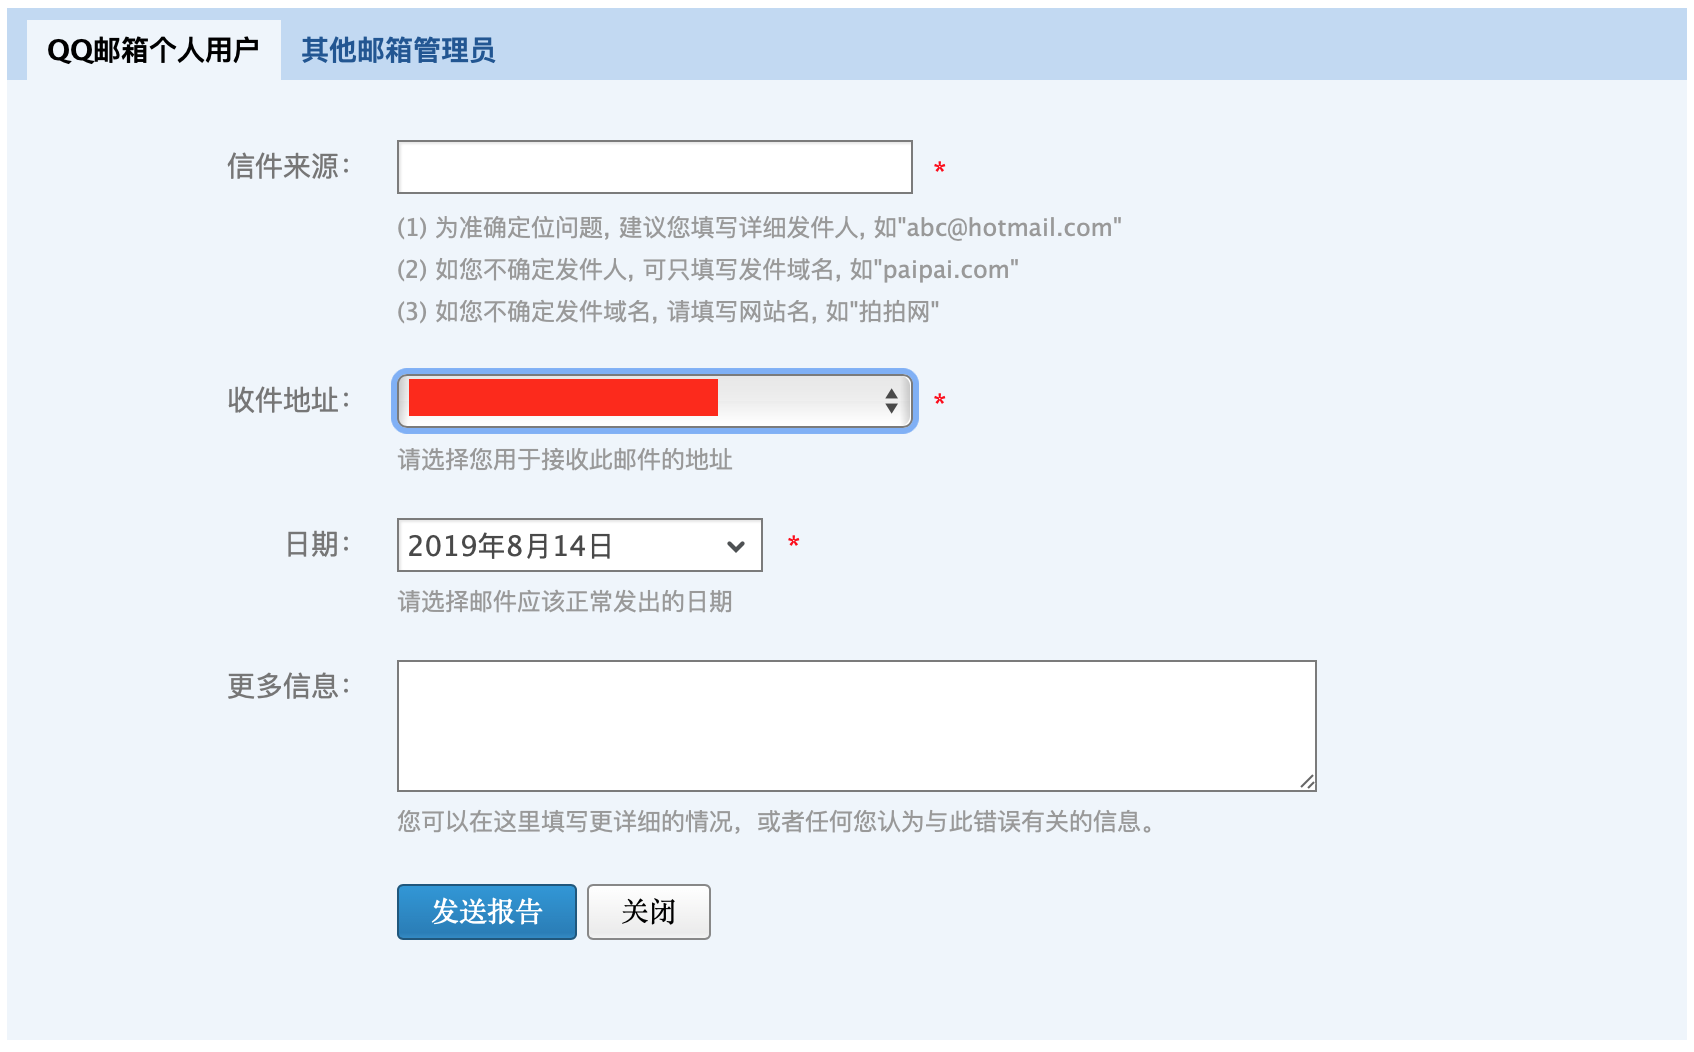 How to sign in and sign out of QQ Mail